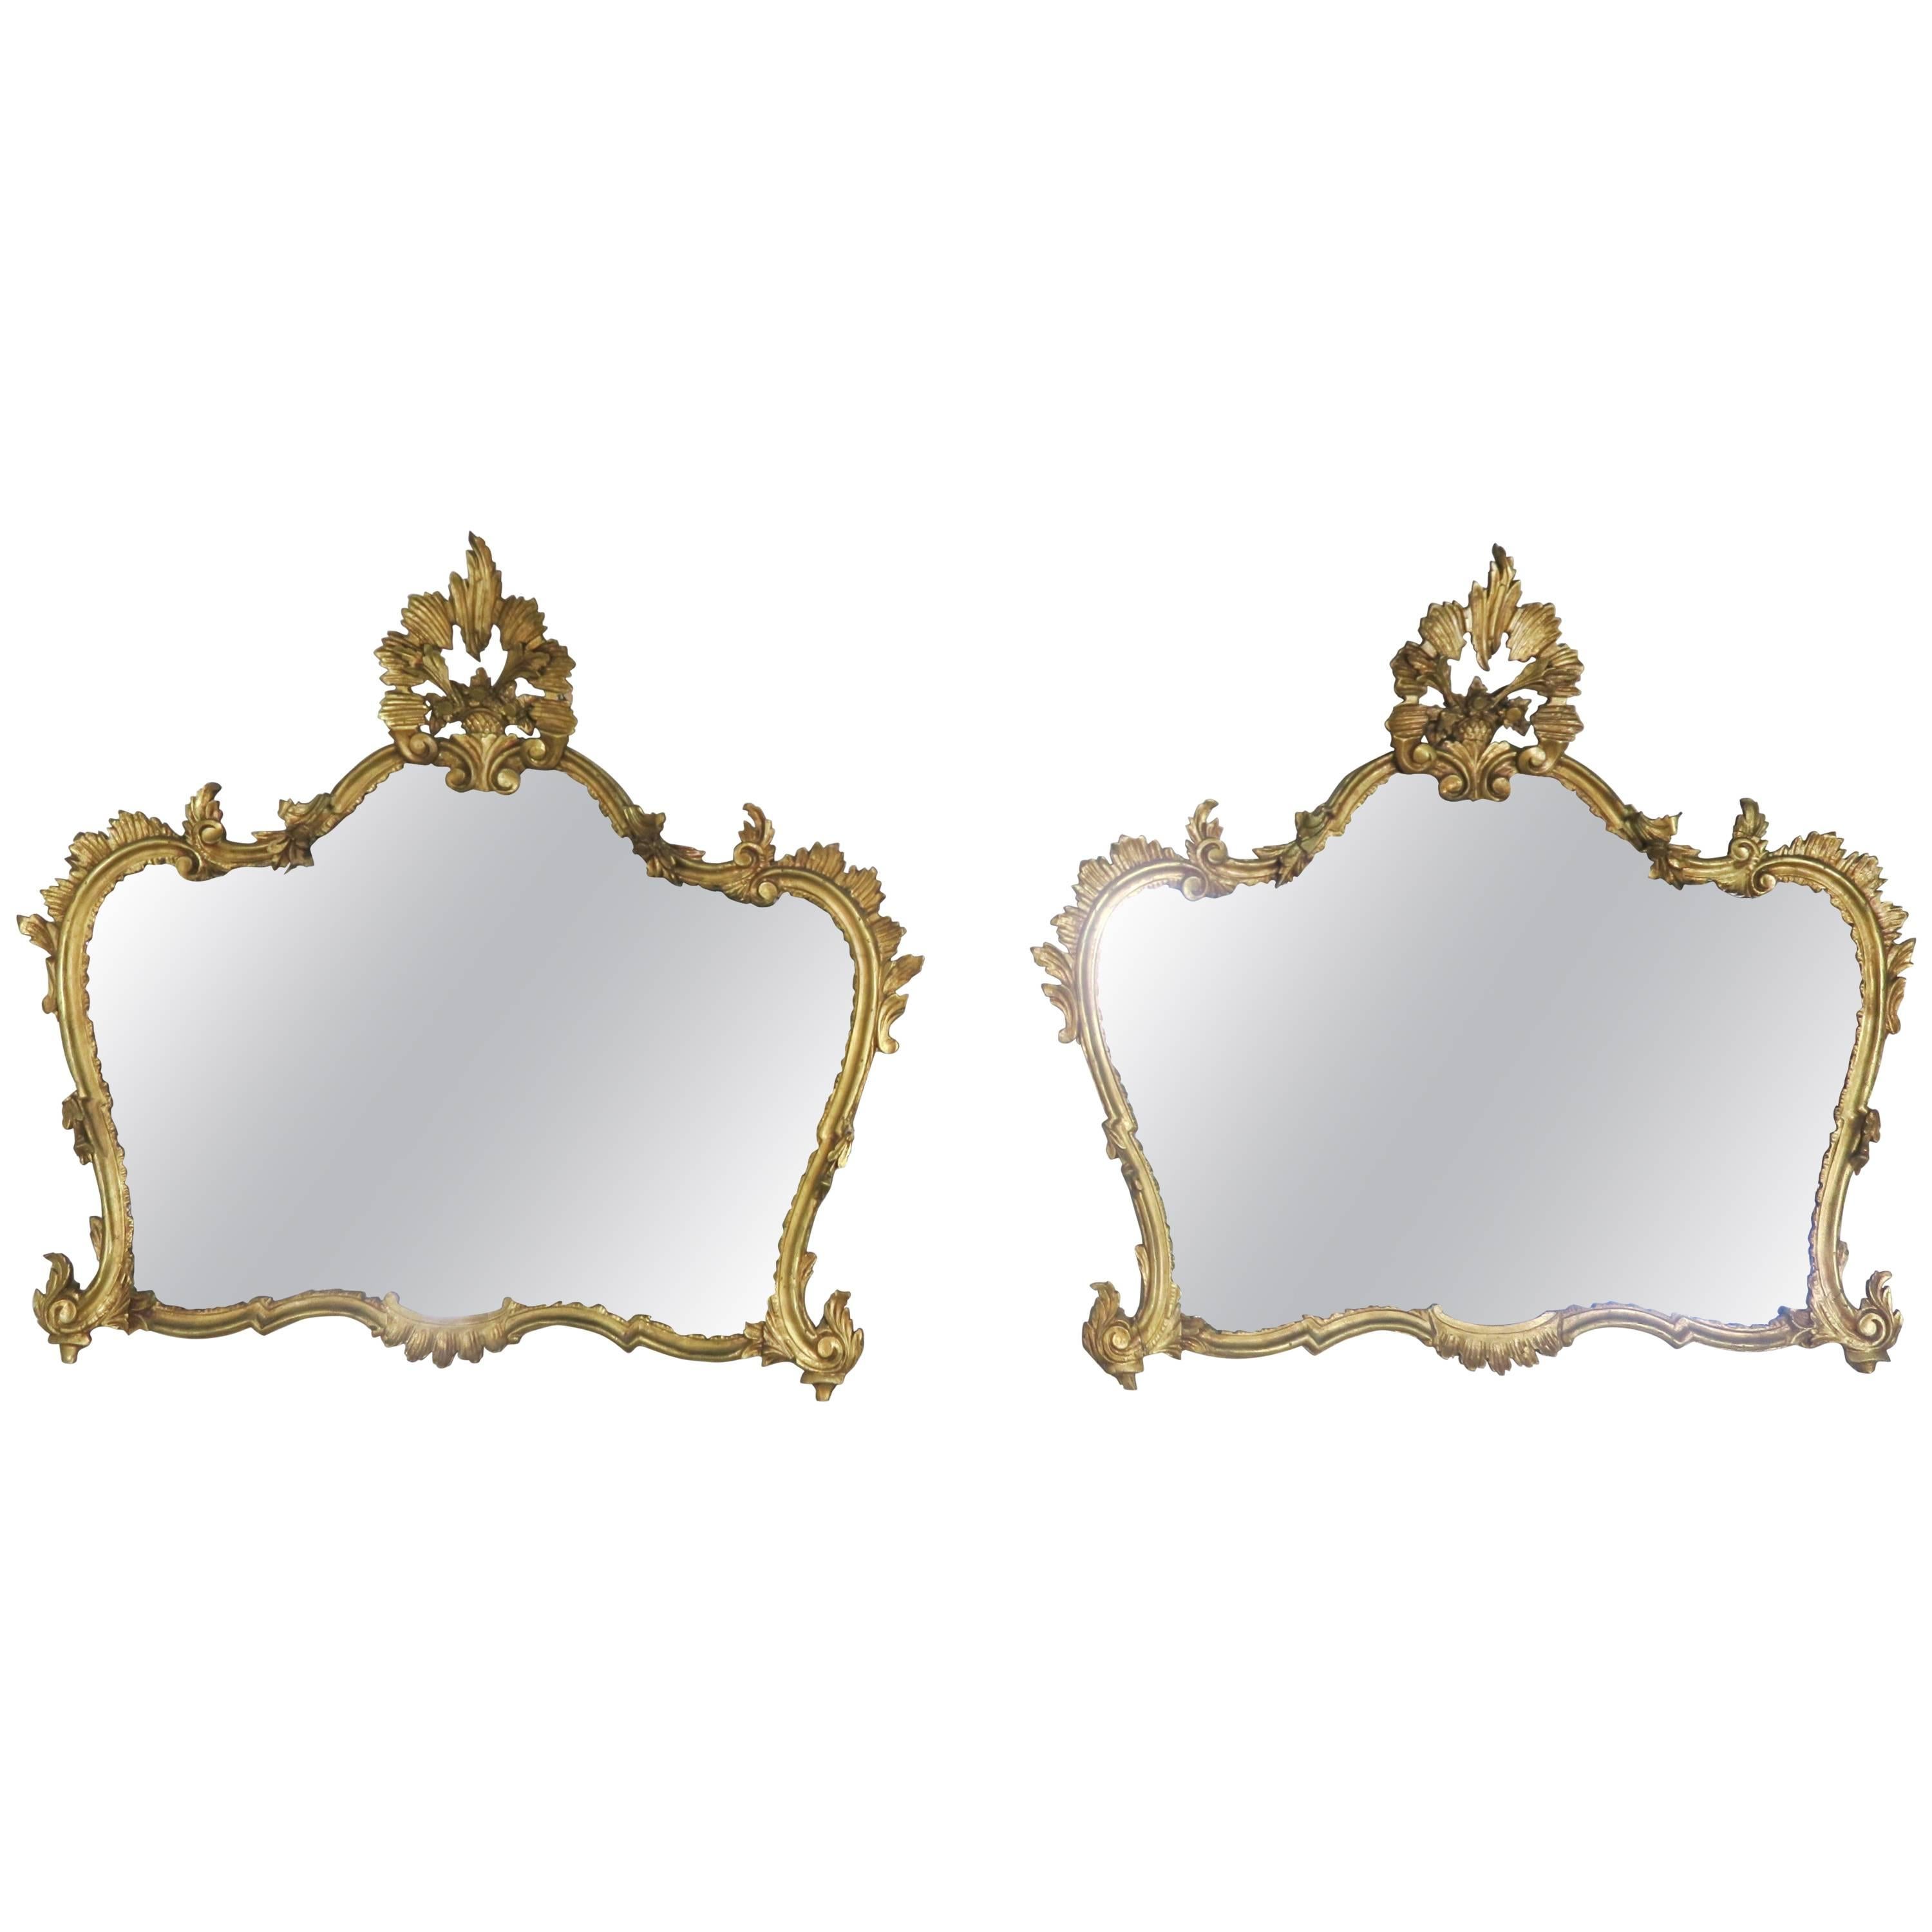 Pair of French Giltwood Mirrors, circa 1930s